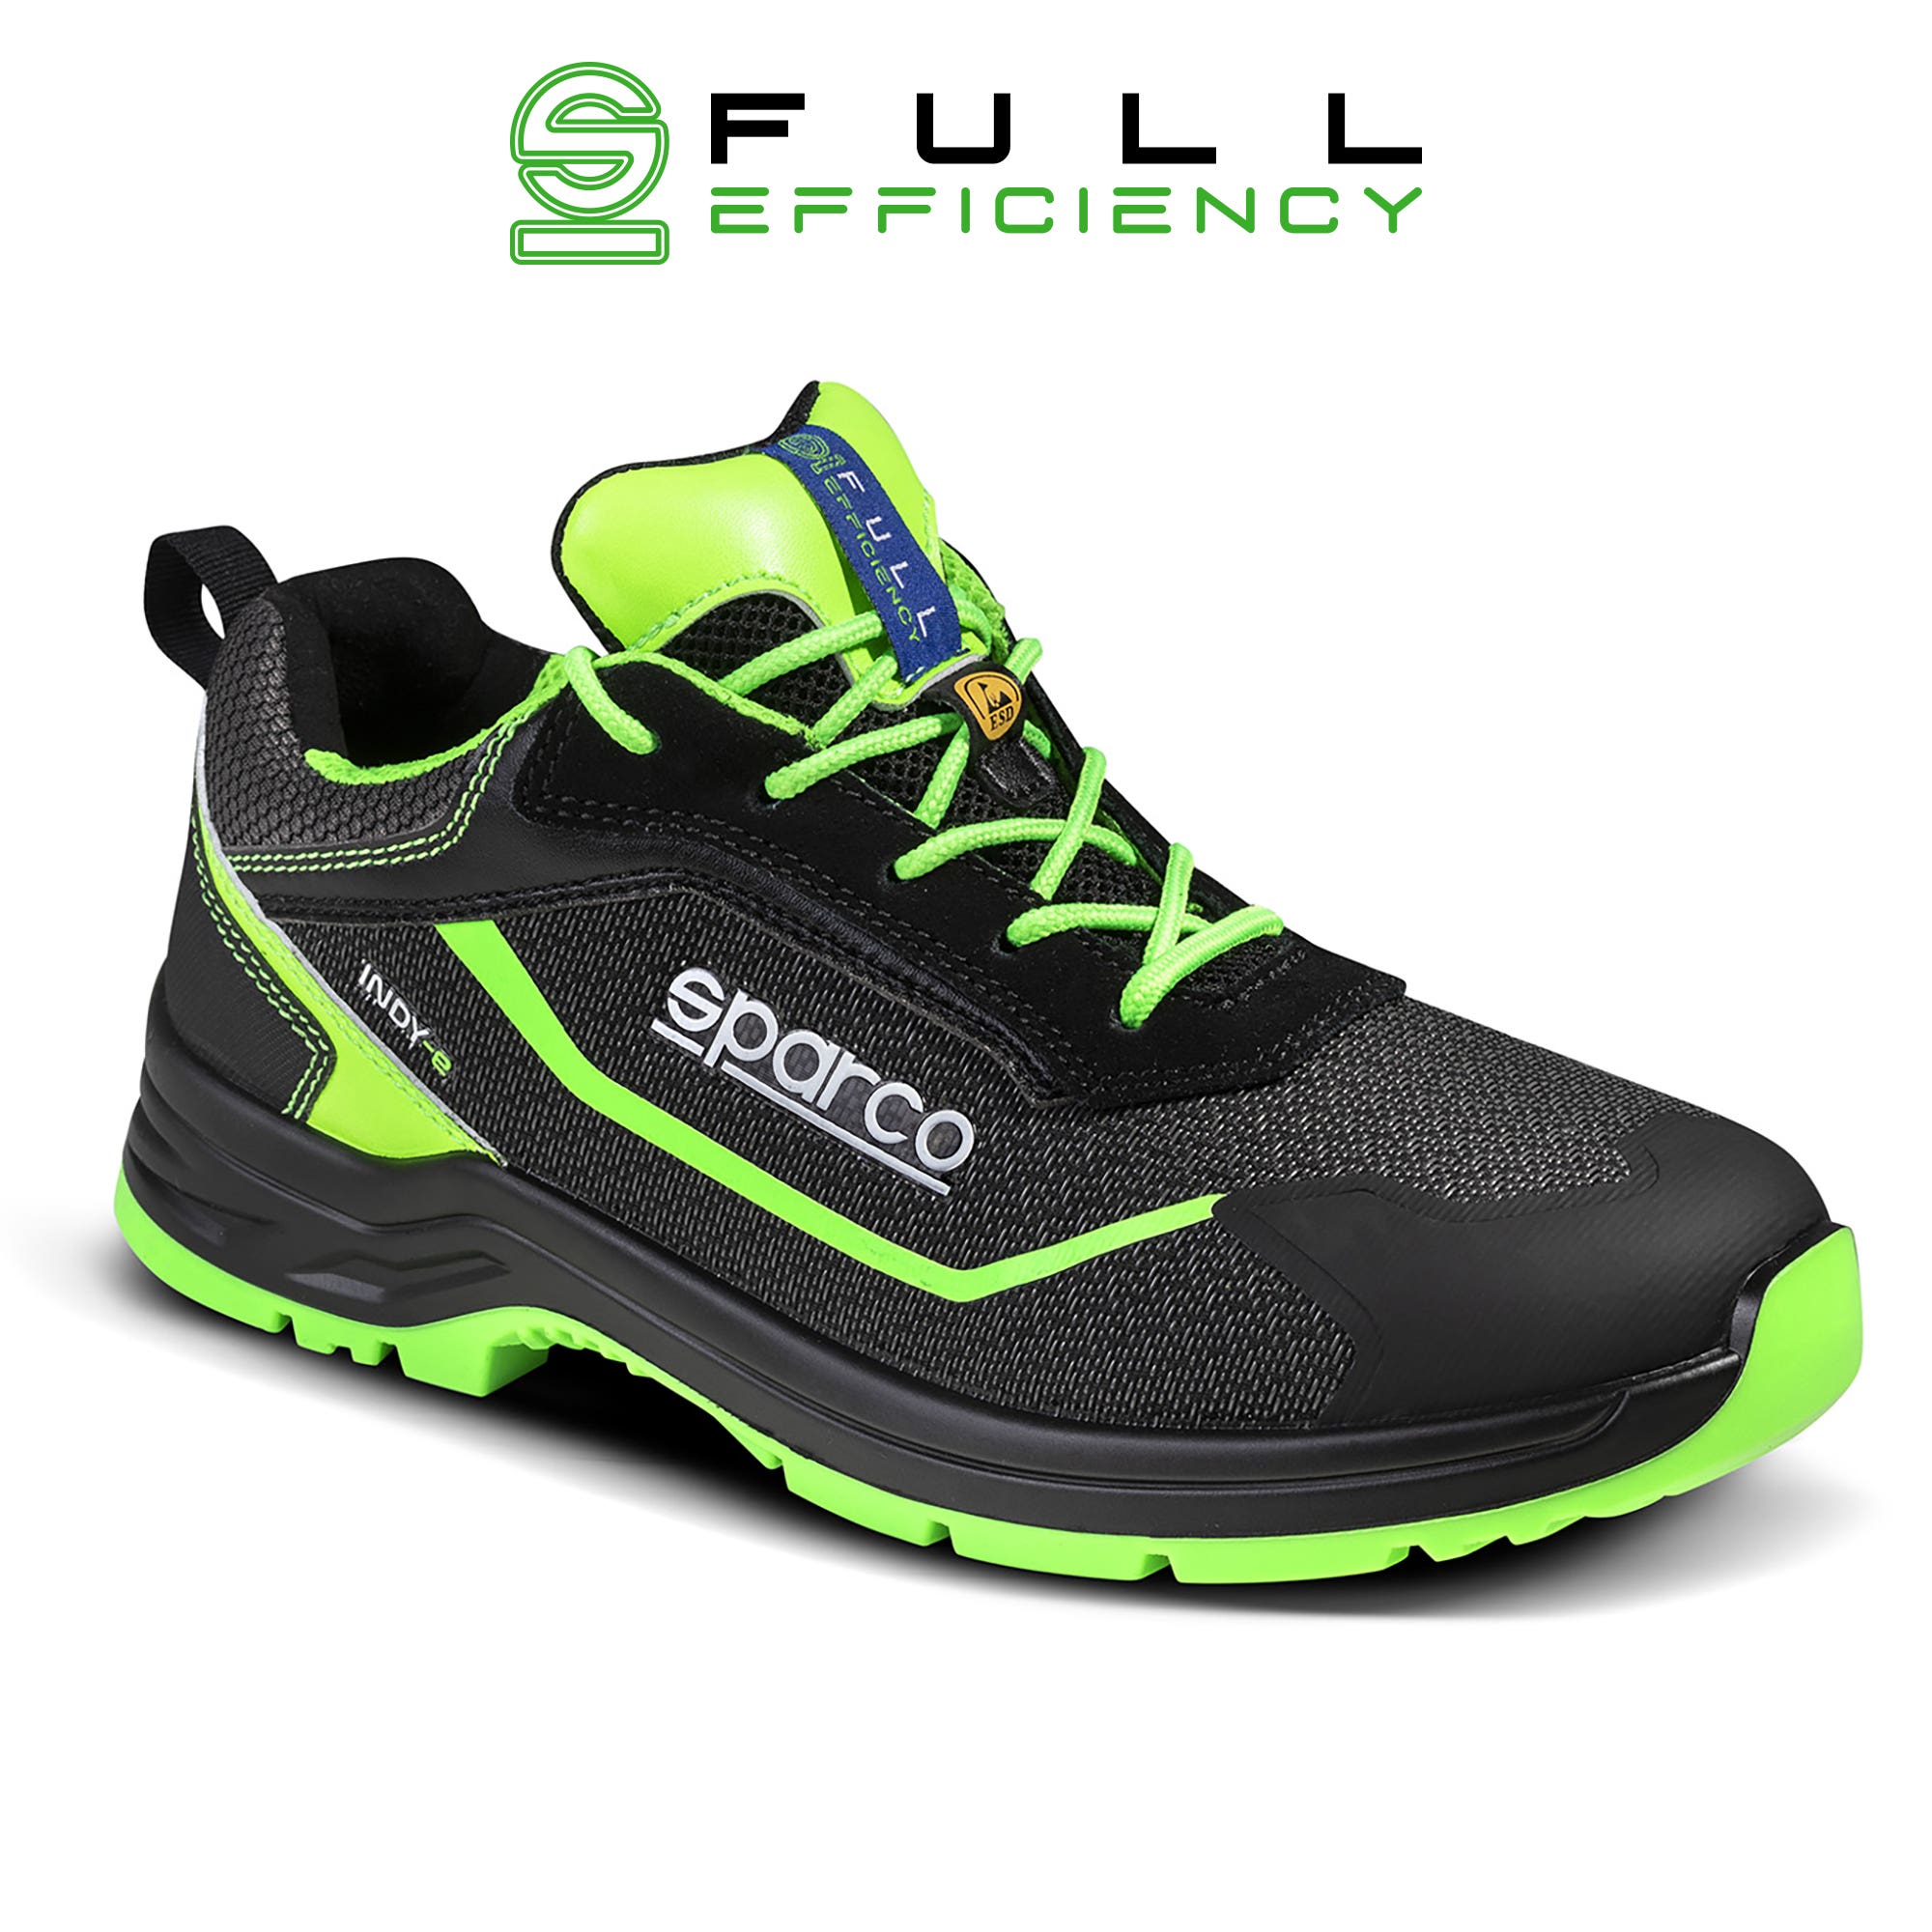 SCARPA INDY-E FORESTER S3 ESD TG 35